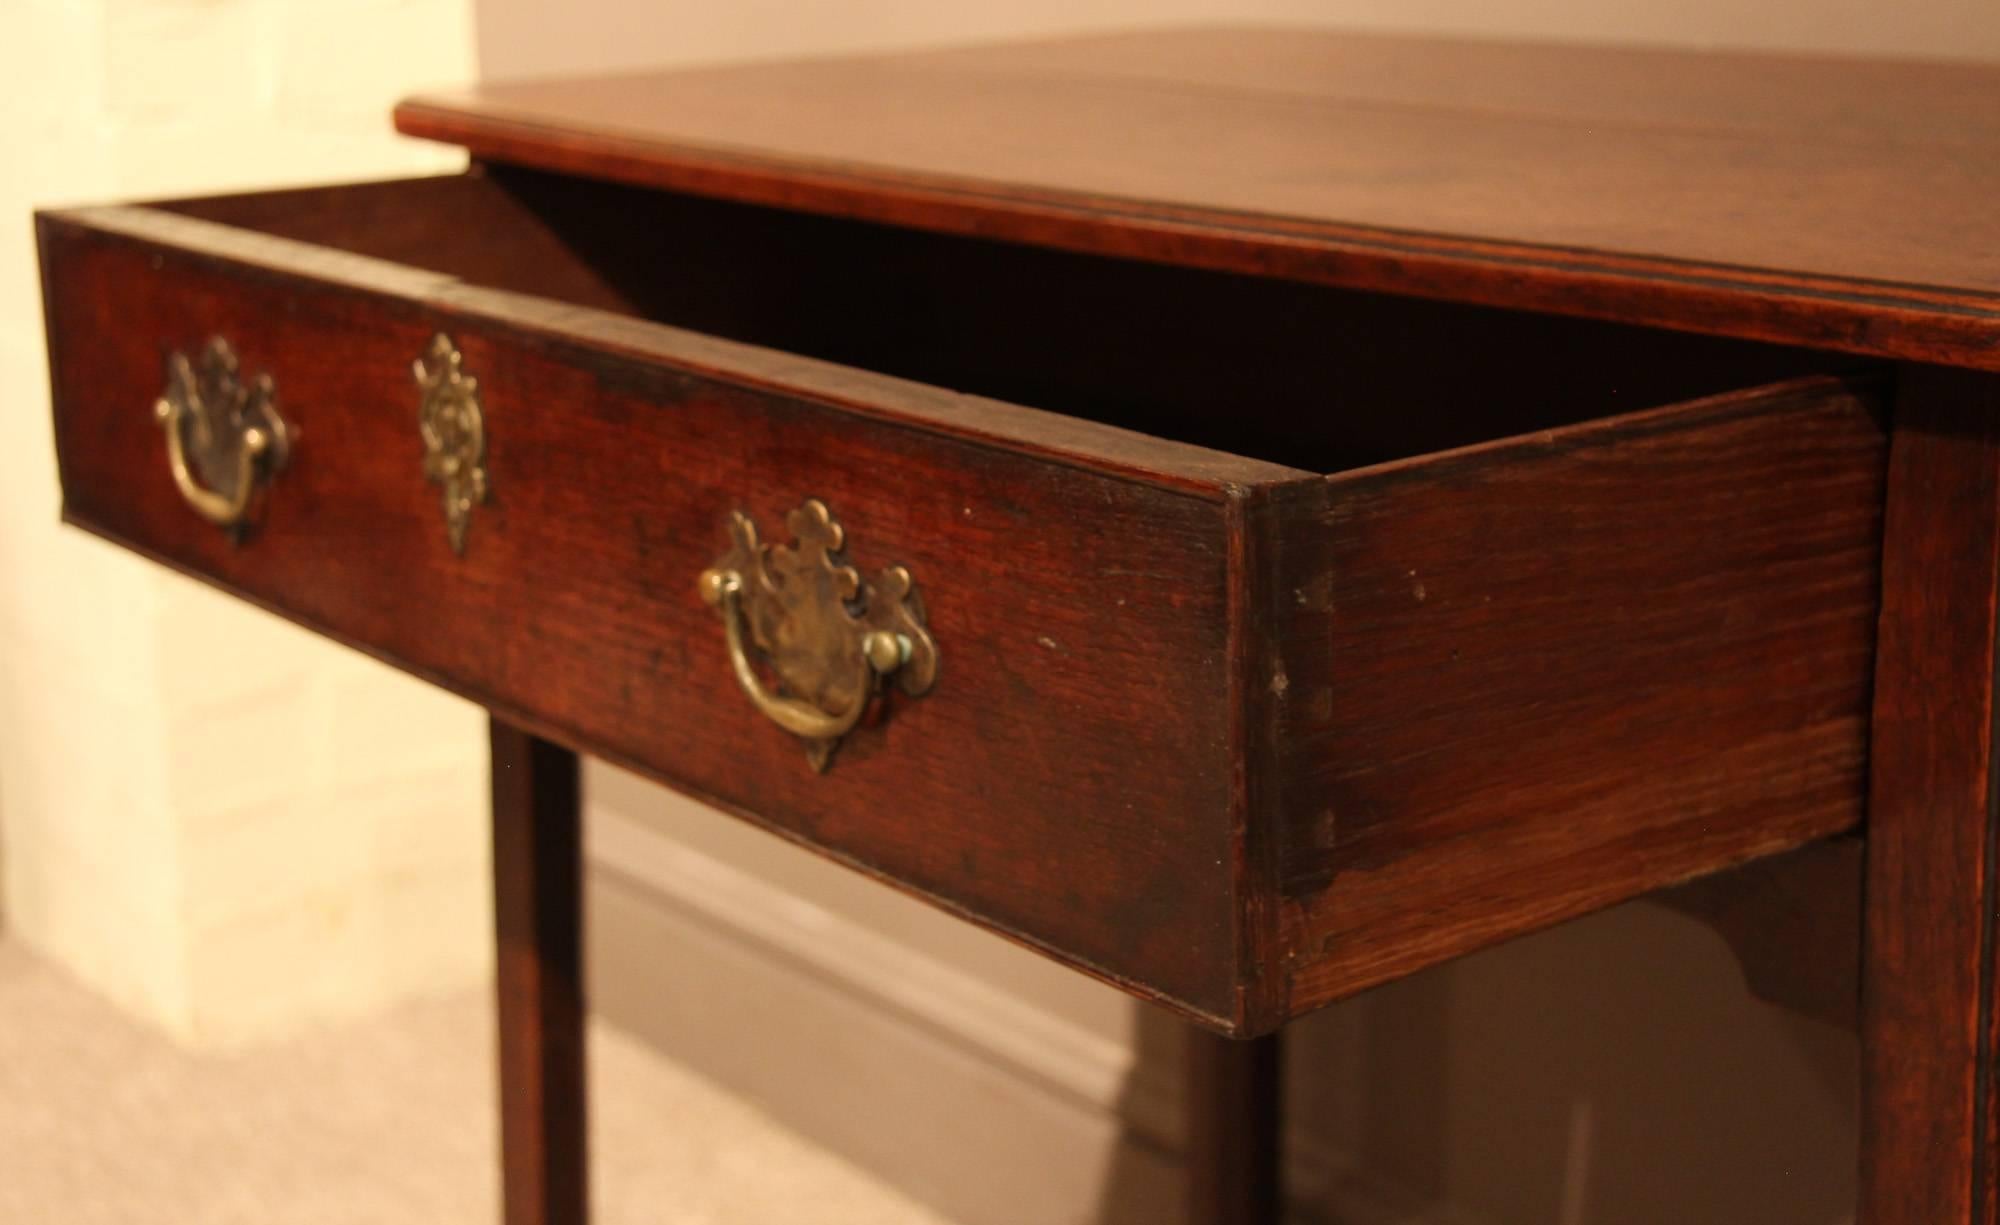 An 18th century oak single drawer lowboy. All of the items that we advertise for sale have been as accurately described as possible and are in excellent condition, unless otherwise stated. Please note that we are also able to arrange a full shipping